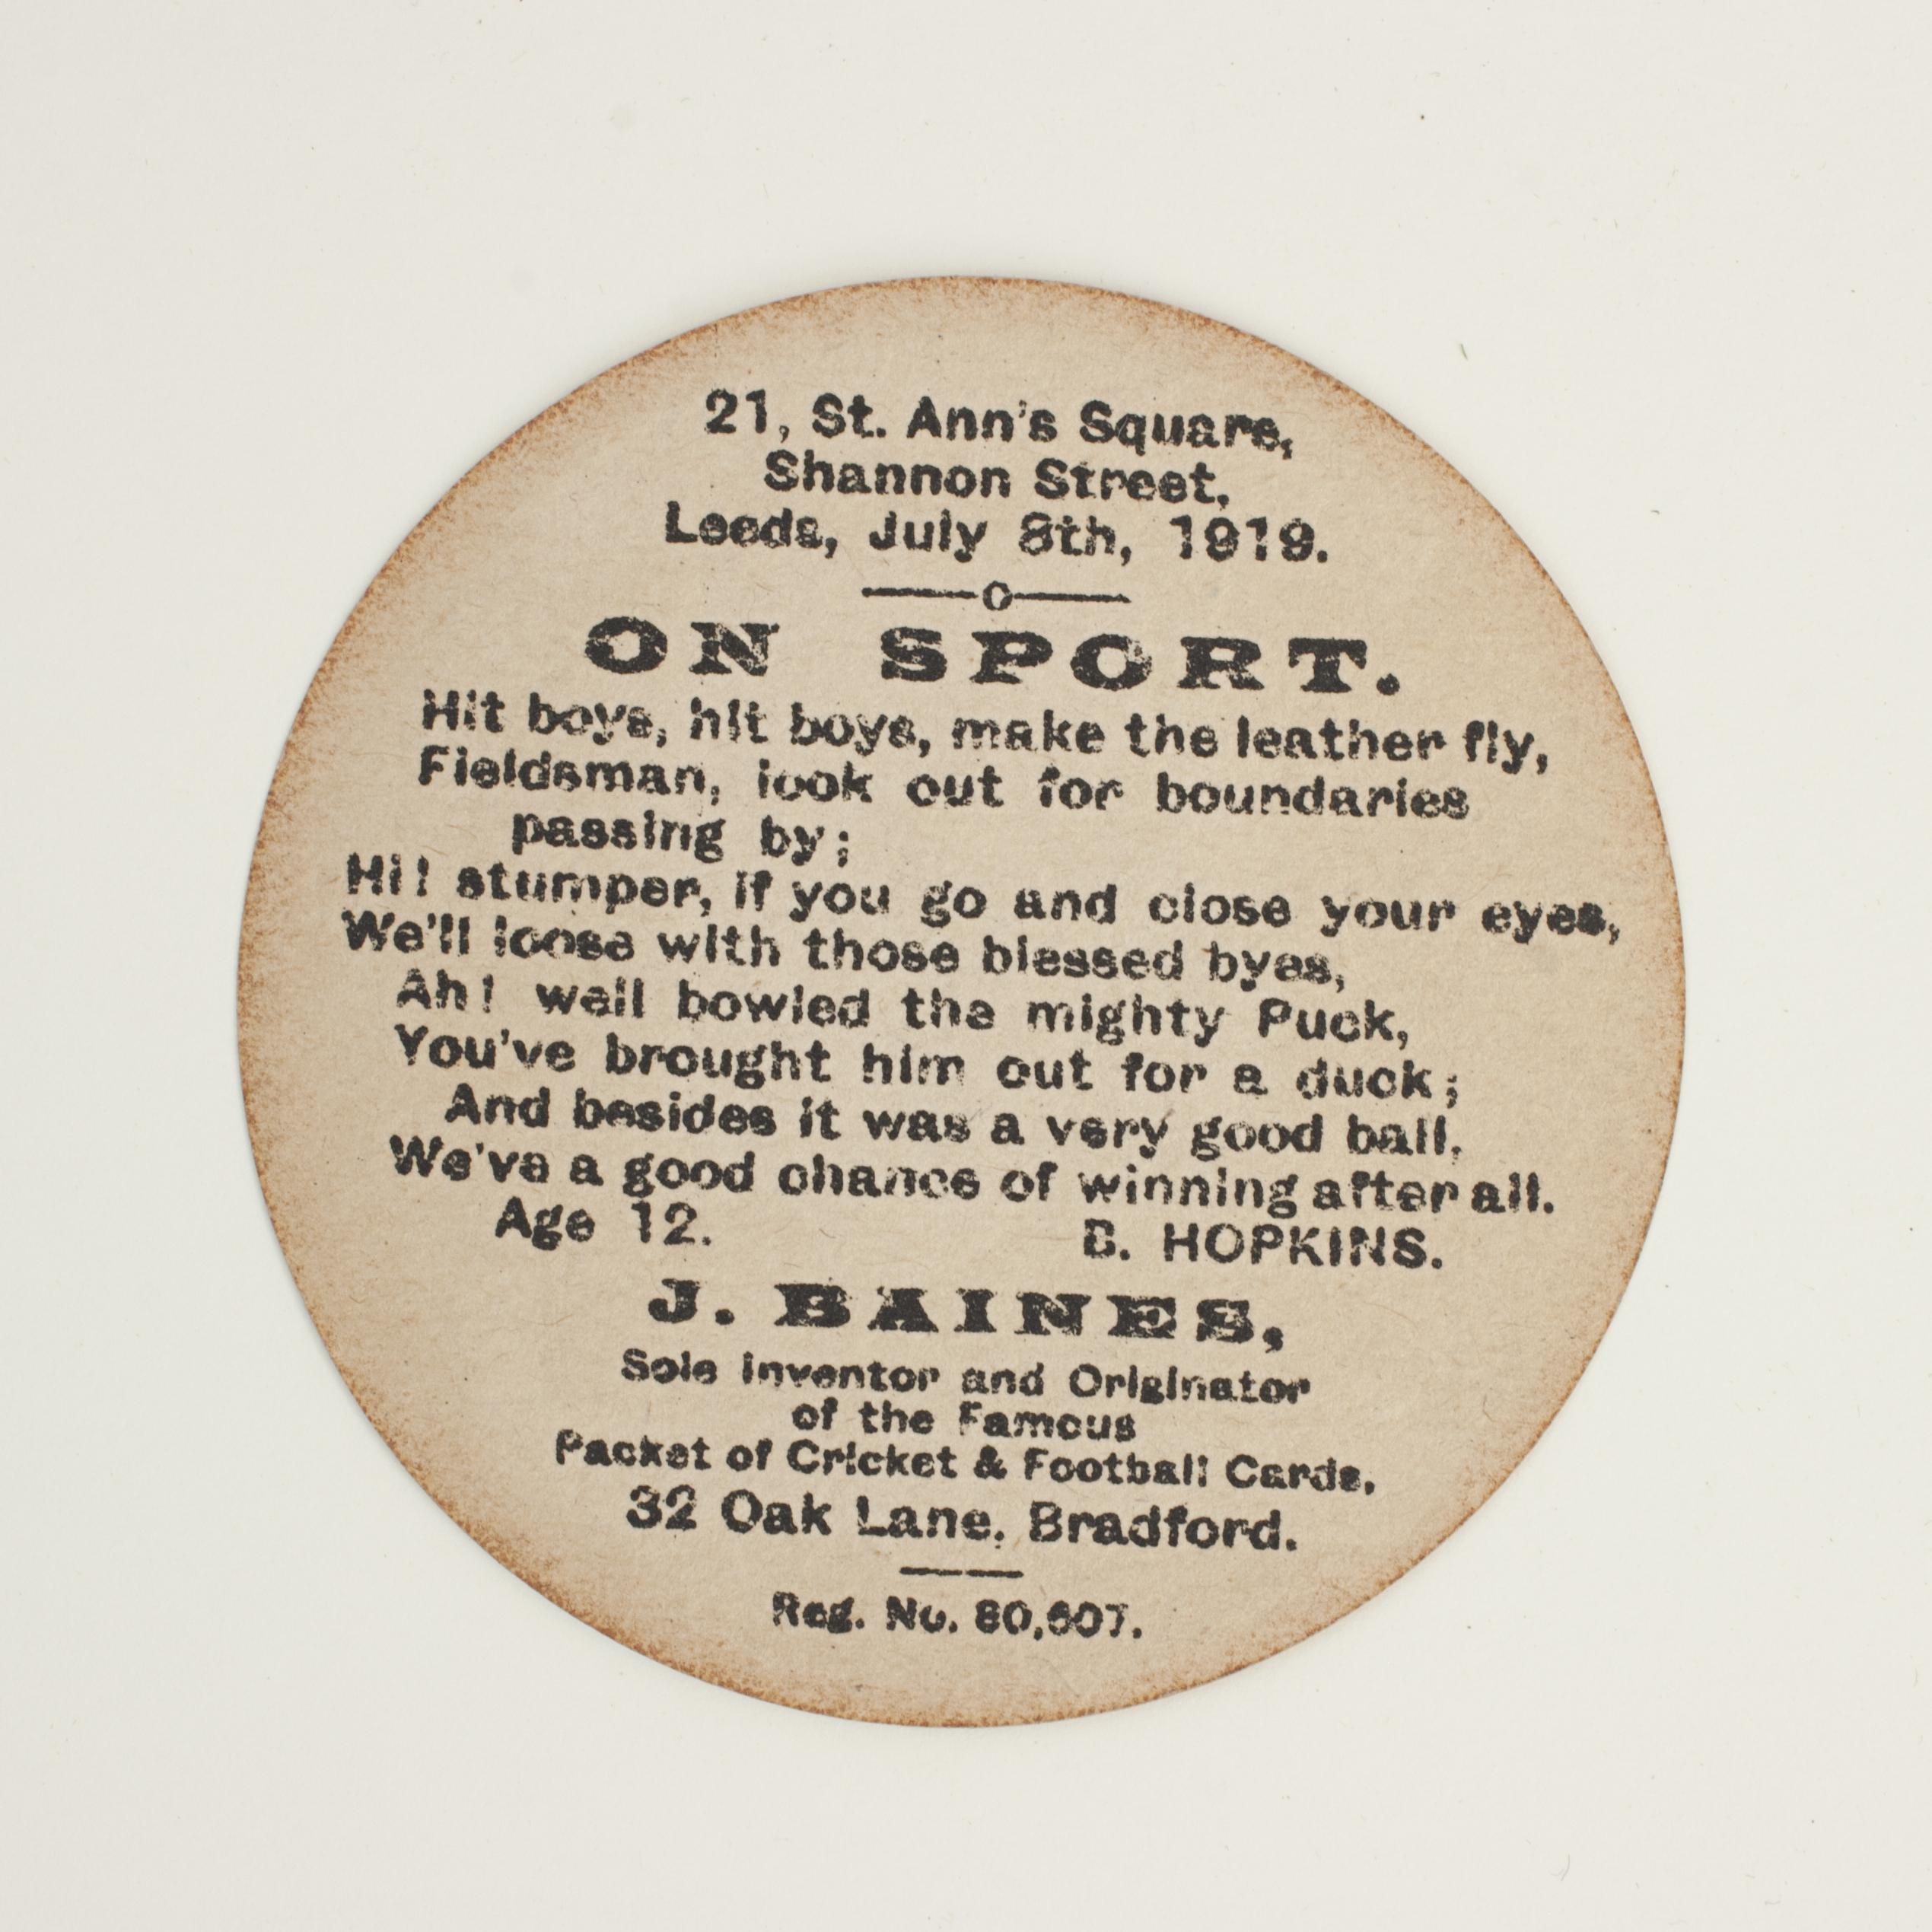 Baines football trade card, Dolphin Holme. Play The Game.
A rare circular football trade card in the shape of a leather football ball. Made by the toy shop owner from Bradford, John Baines. Baines went on to produce not only football cards but